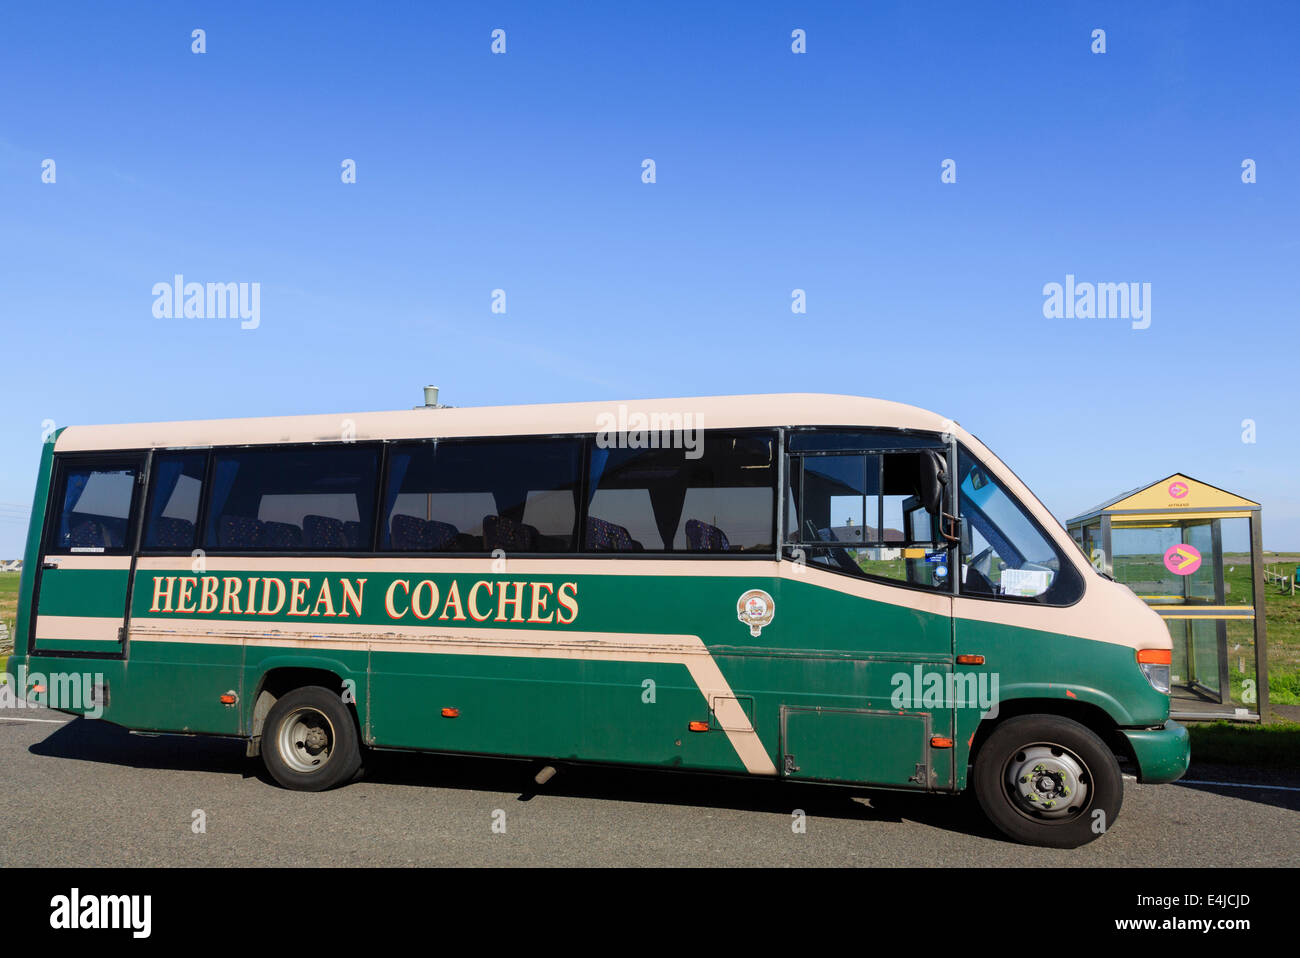 Exterior of Hebridean Coaches bus waiting at a bus stop. Solas, North Uist, Outer Hebrides, Western Isles, Scotland, UK, Britain Stock Photo